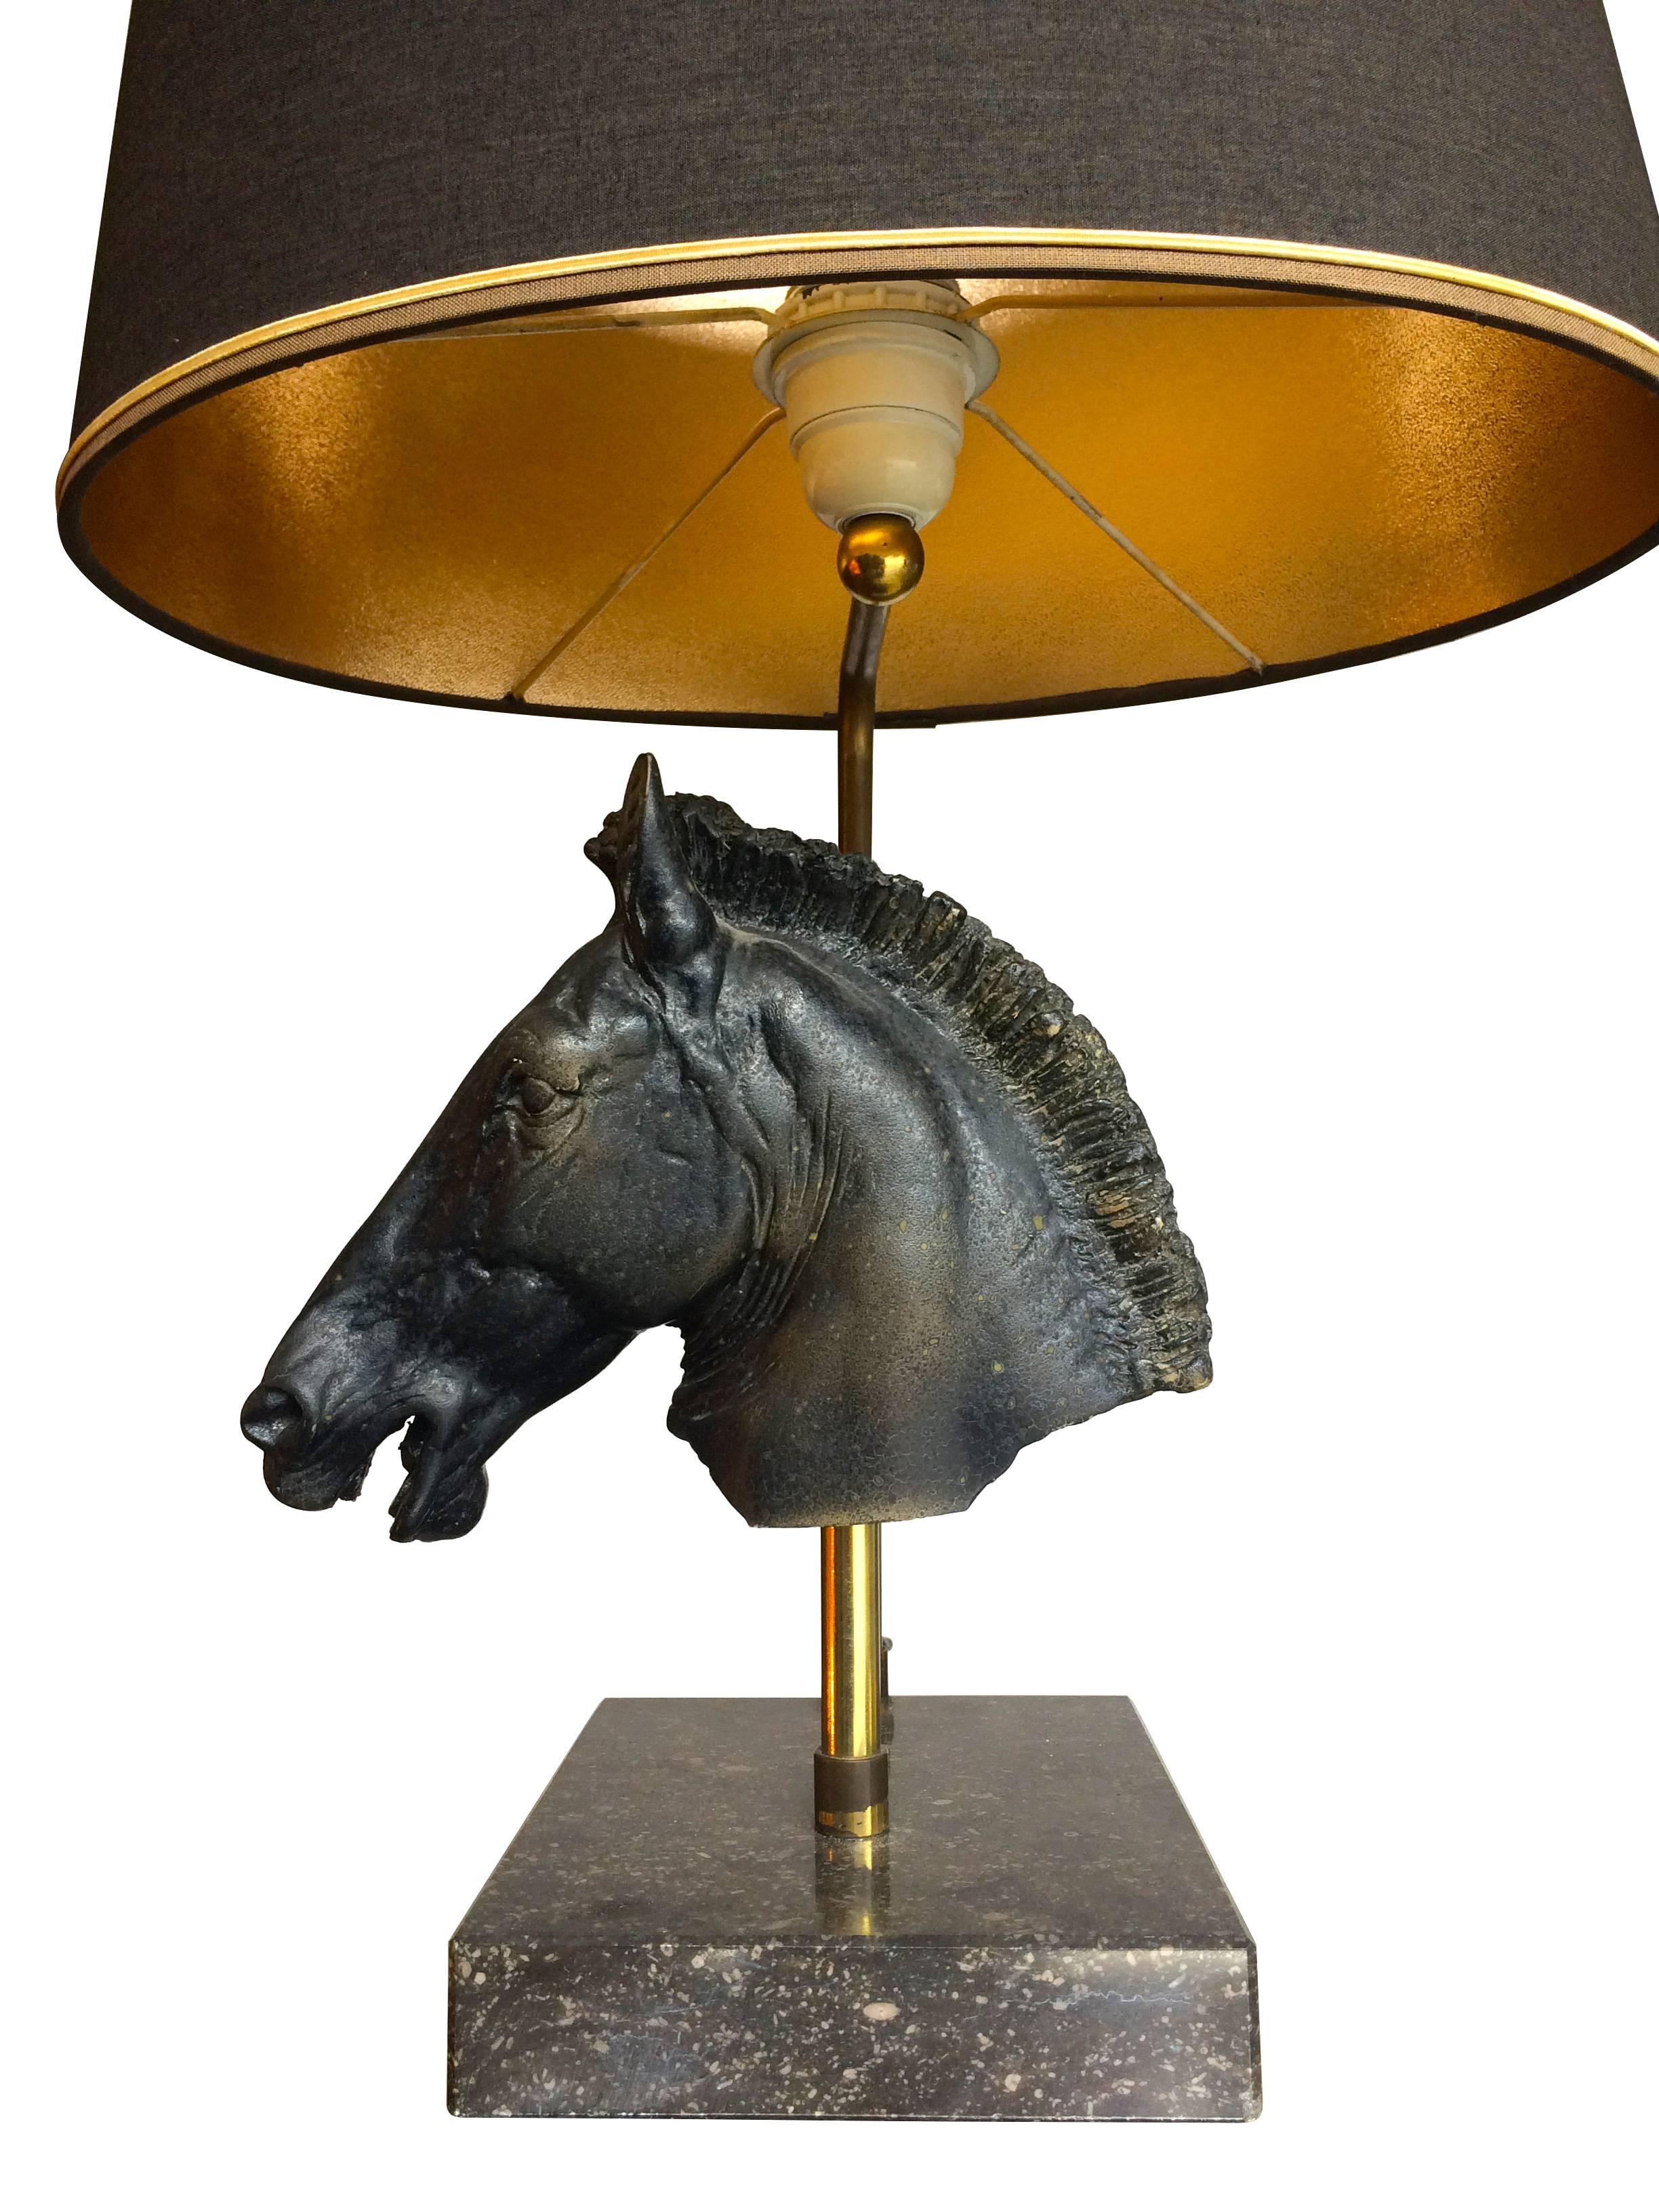 A Maison Jansen style lamp, with black resin sculptural horse head, supported on brass stand on a black marble base, with brass single light fitting supporting an original black shade with gold interior. Re wired with black cord flex and PAT tested.